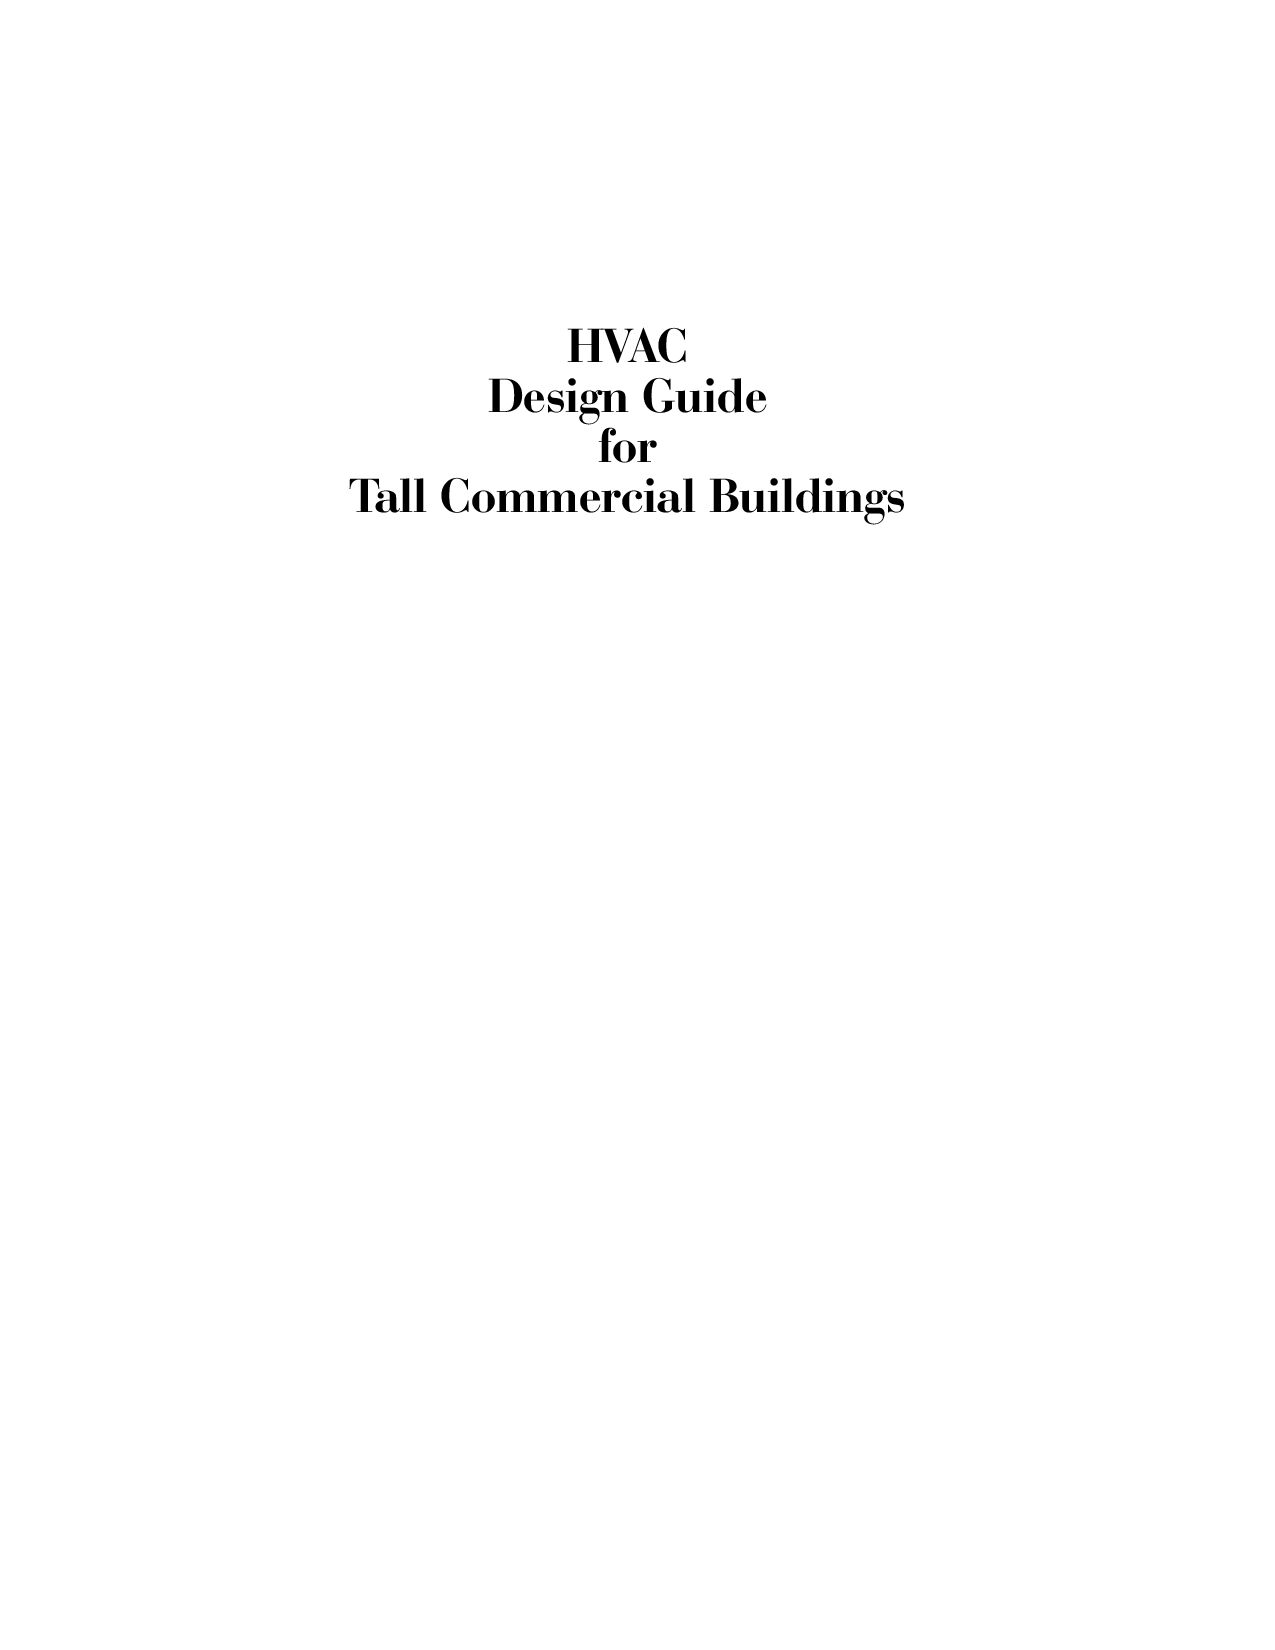 HVAC Design Guide for Tall Commercial Buildings 2004封面图